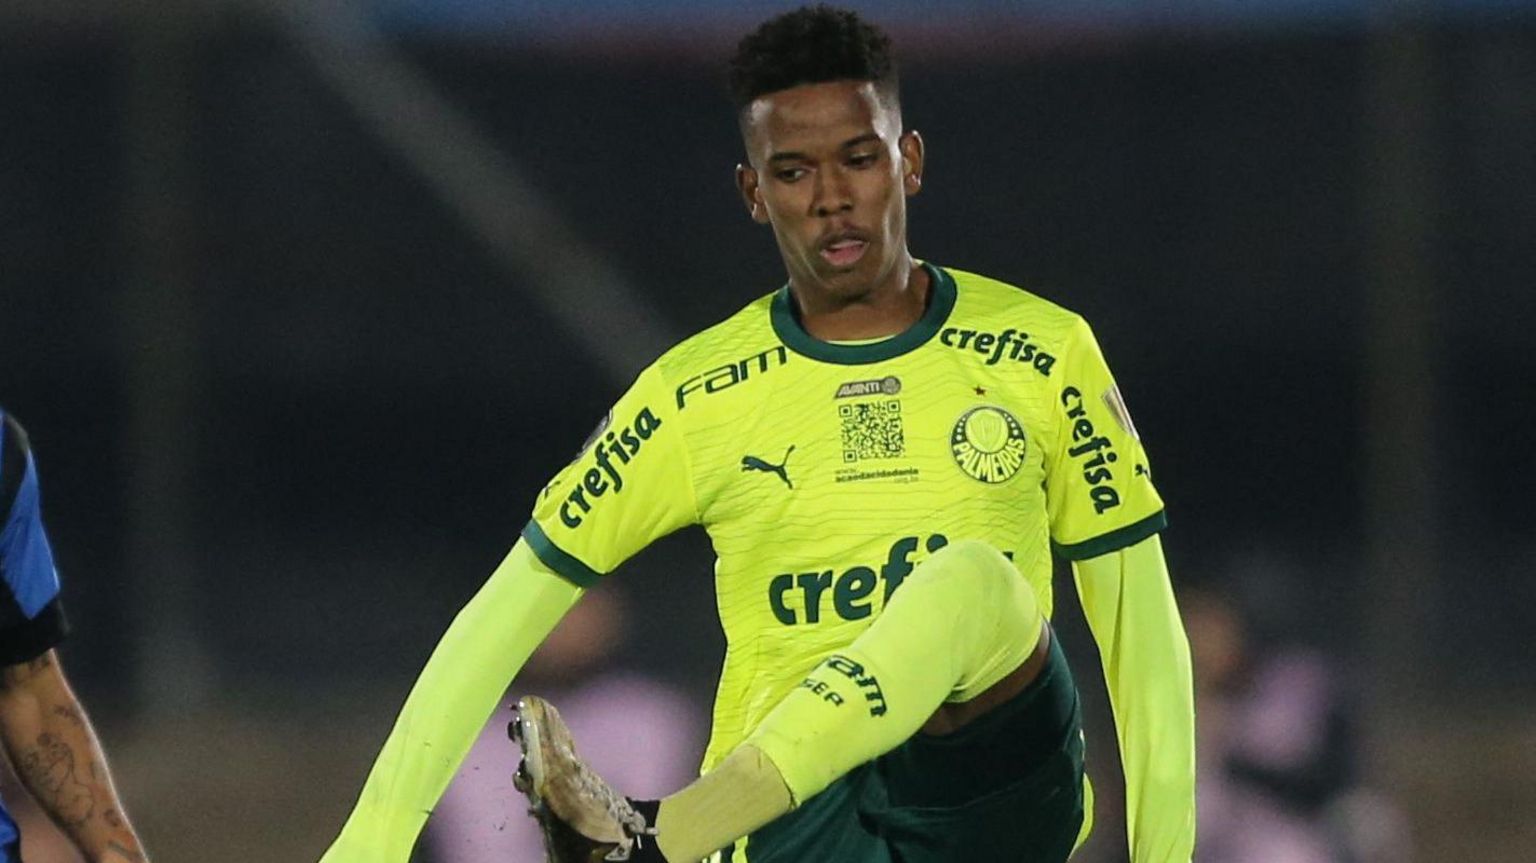 Chelsea to Sign 17-Year-Old Palmeiras Star Estevao for £29m